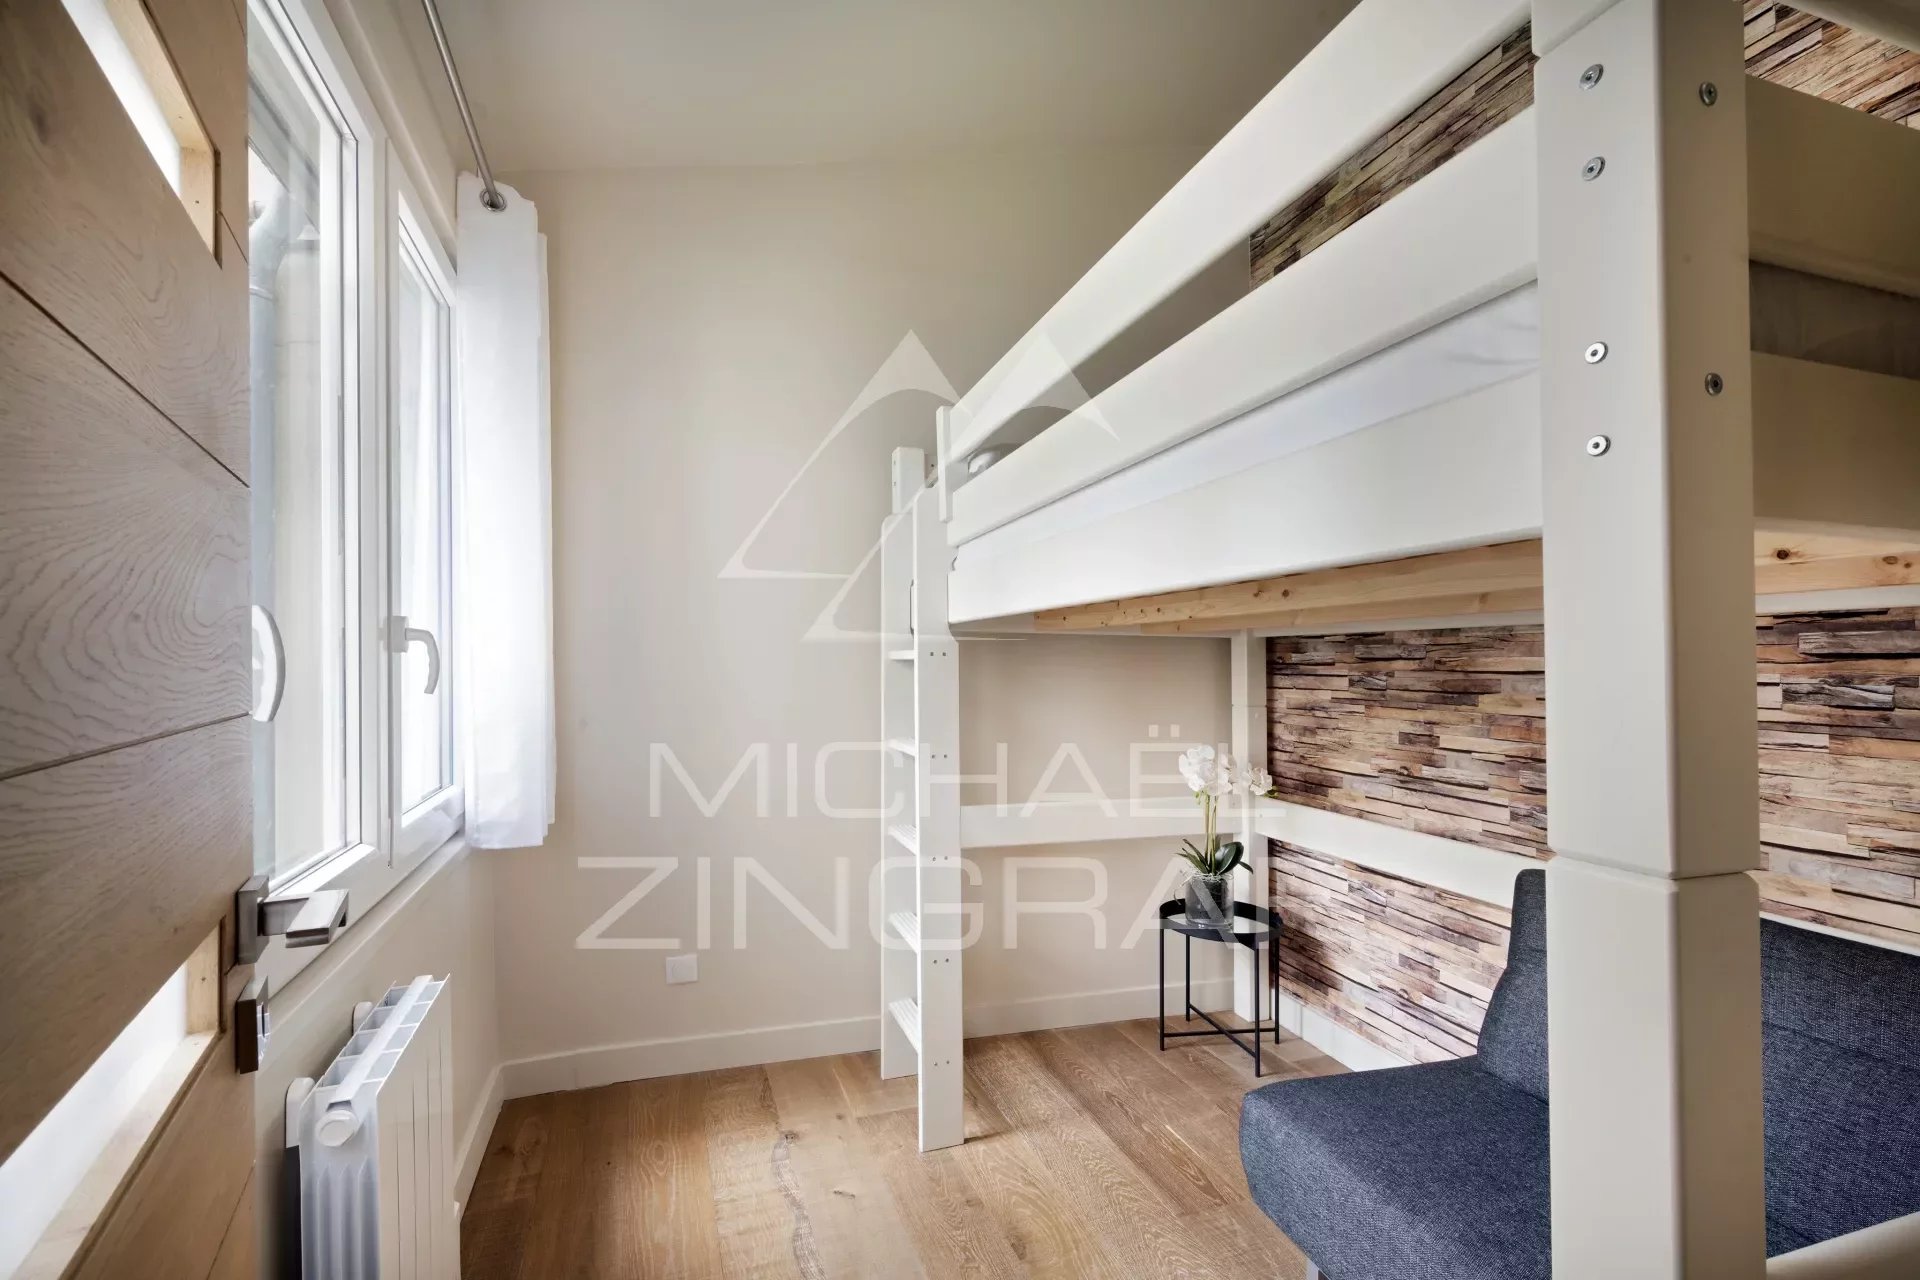 Sale apartment - In the centre of the Marais - completely renovated